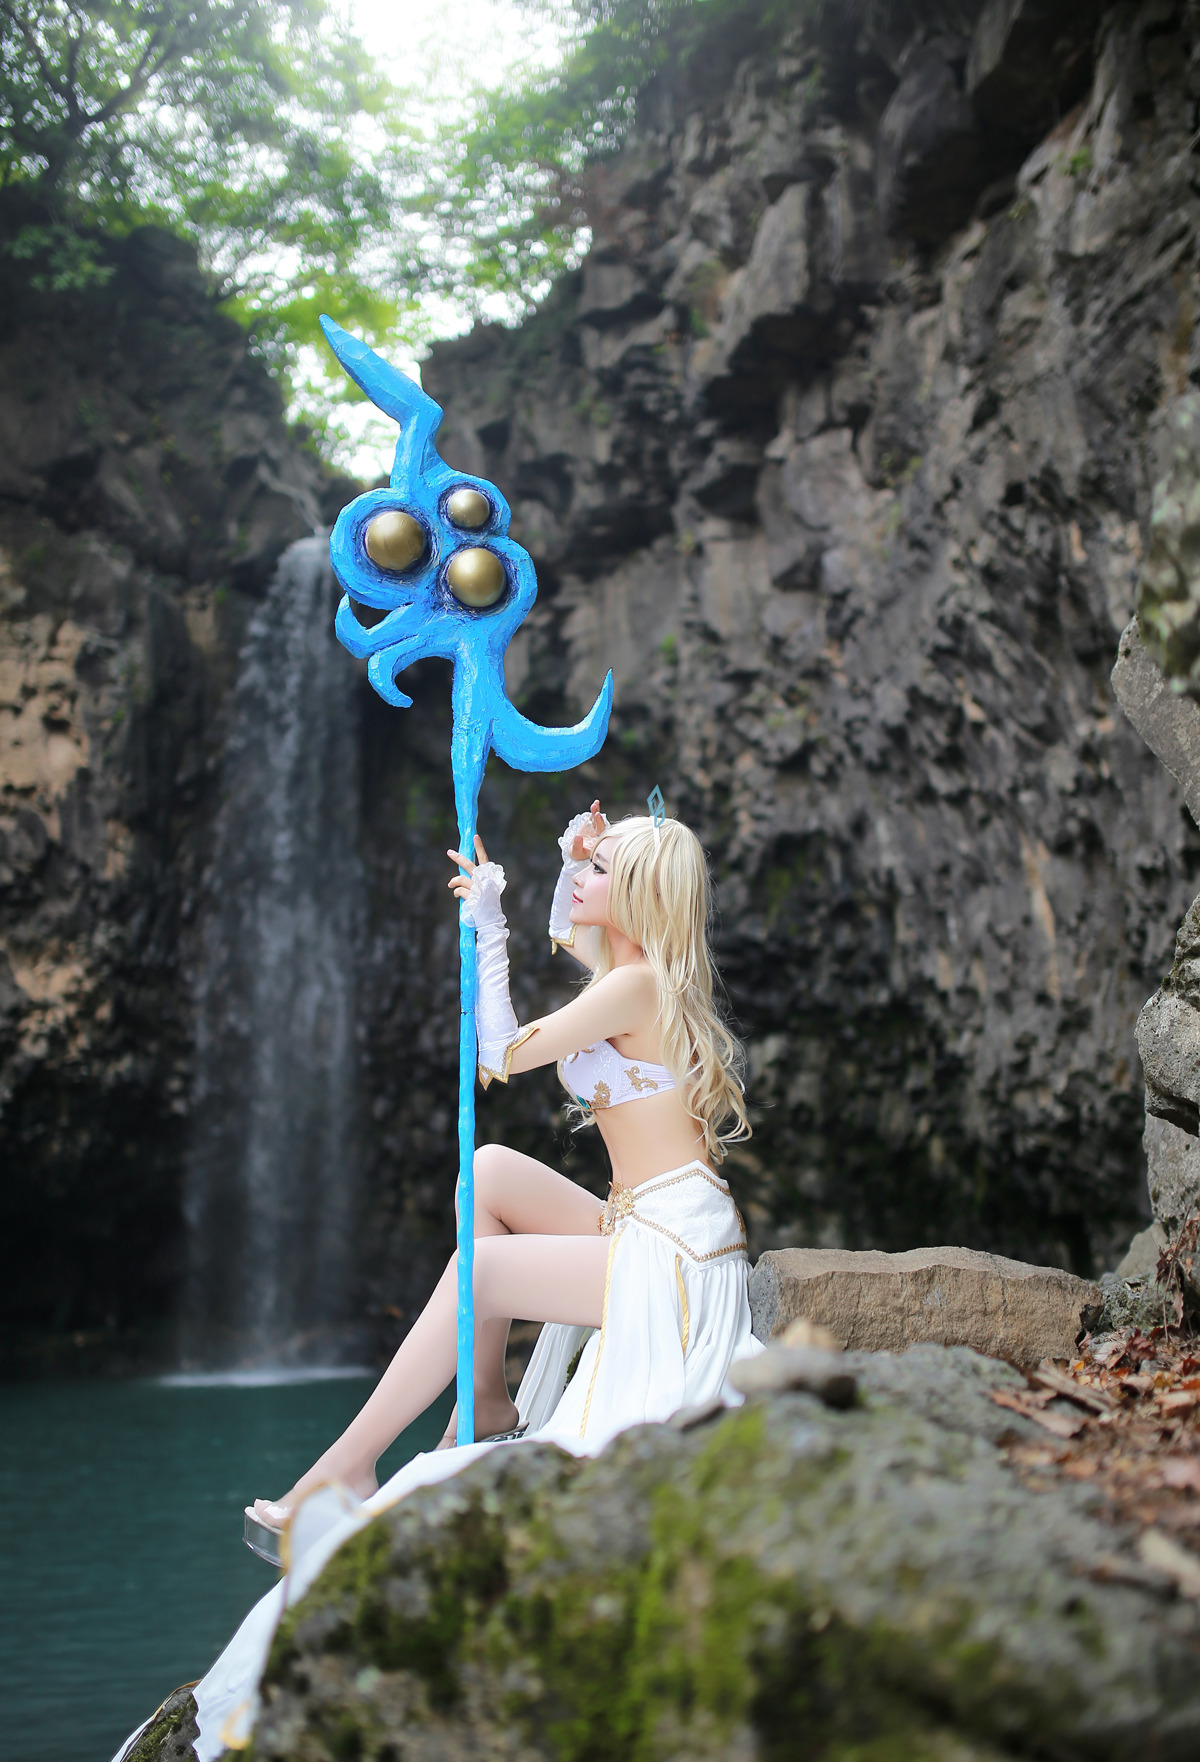 Janna - League of Legends More Cosplay Photos &amp; Videos - http://tinyurl.com/mddyphv